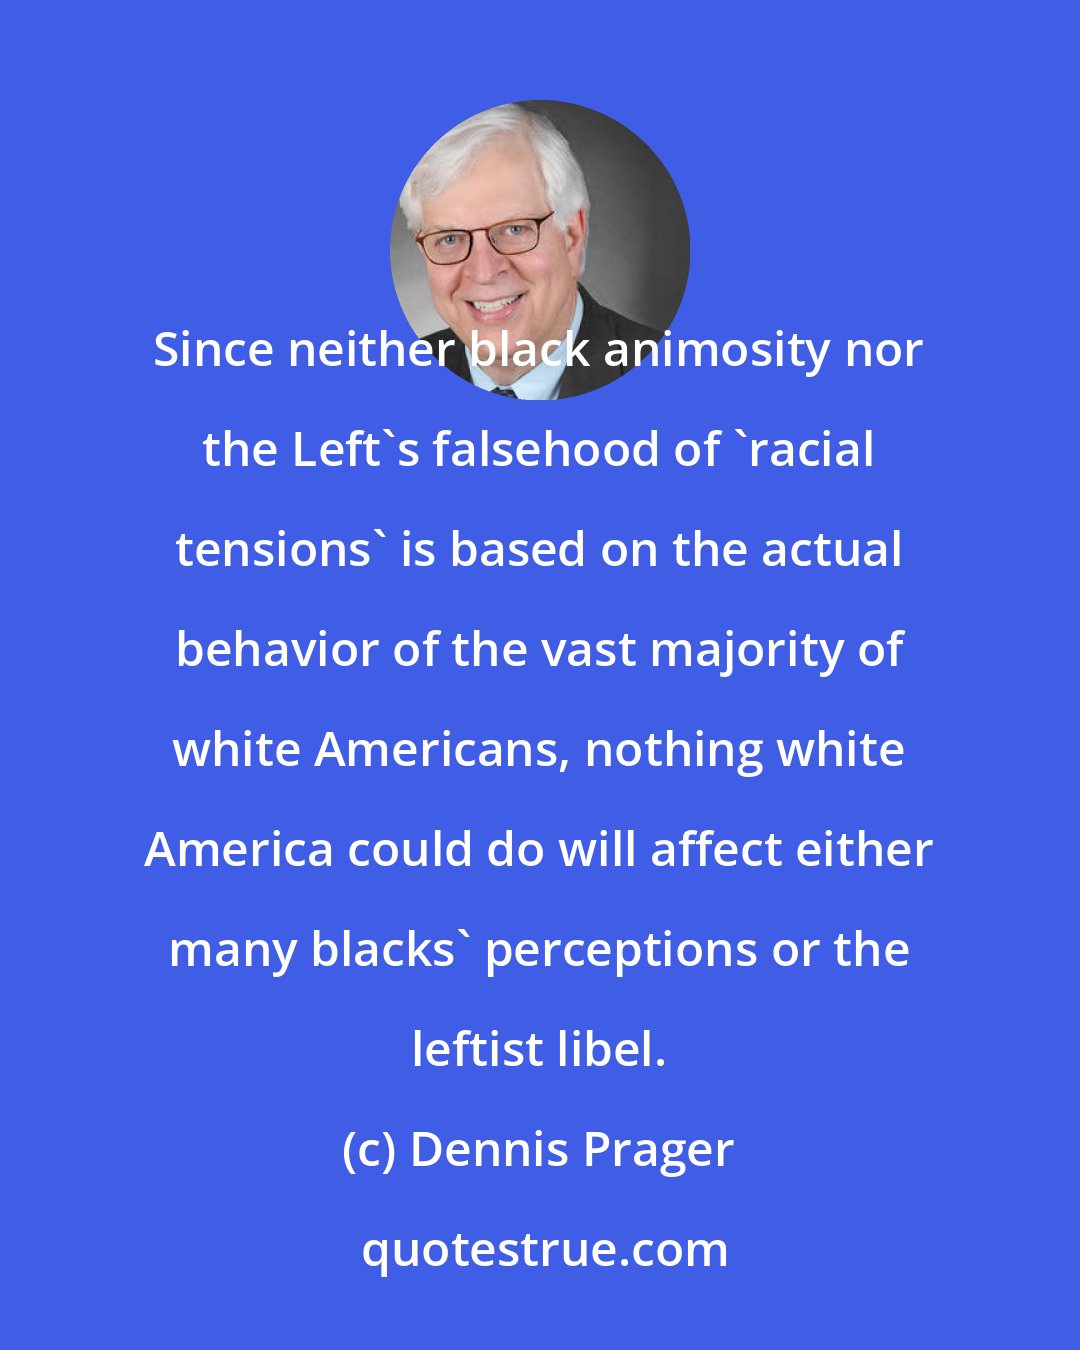 Dennis Prager: Since neither black animosity nor the Left's falsehood of 'racial tensions' is based on the actual behavior of the vast majority of white Americans, nothing white America could do will affect either many blacks' perceptions or the leftist libel.